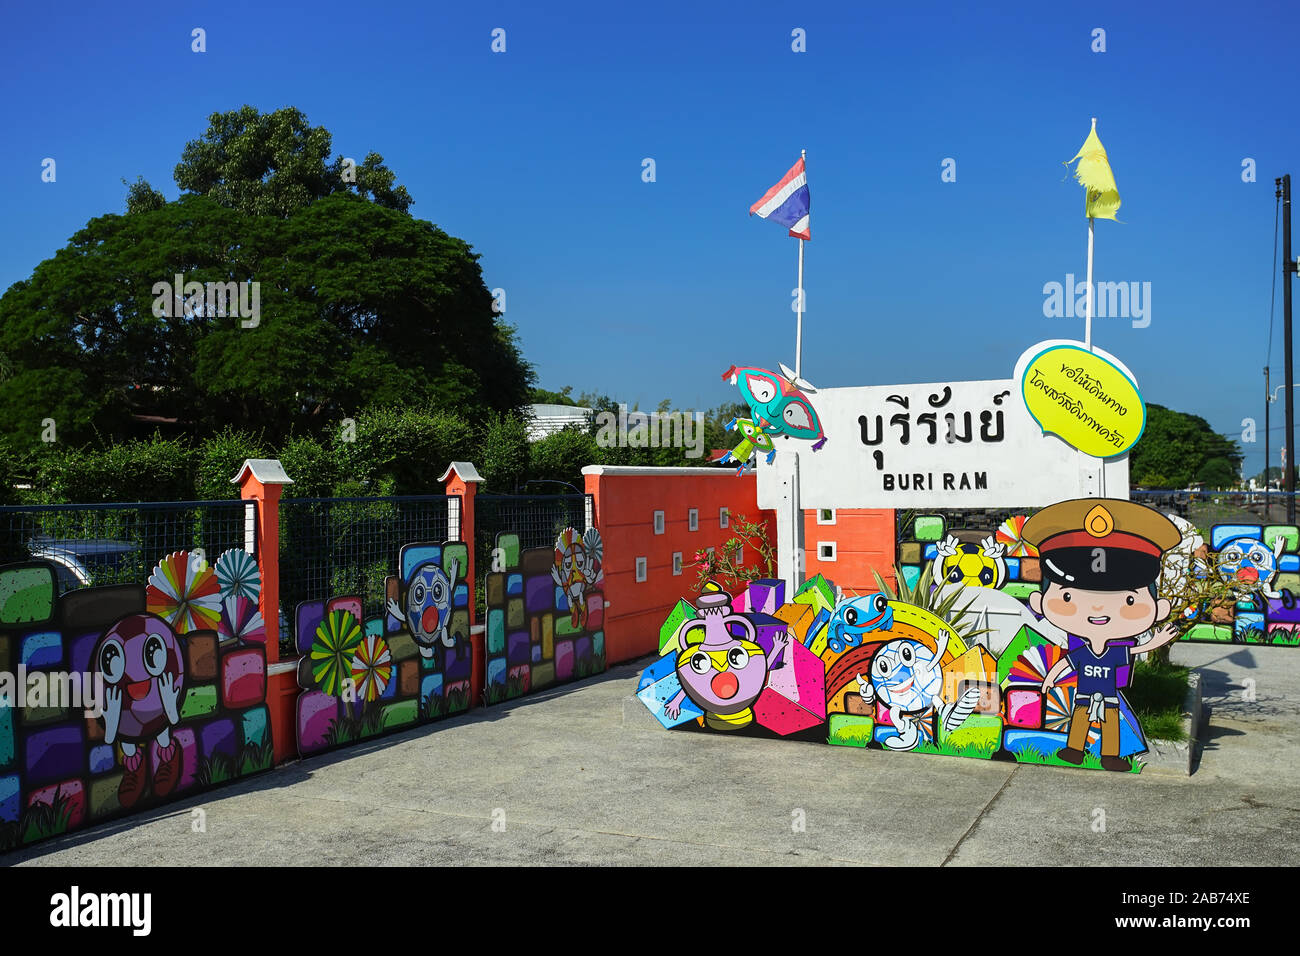 Colorful board for travel promoted in Buri Ram train station, Thailand. (Translation:Buri Ram and Bon Voyage in yellow textbox) Stock Photo